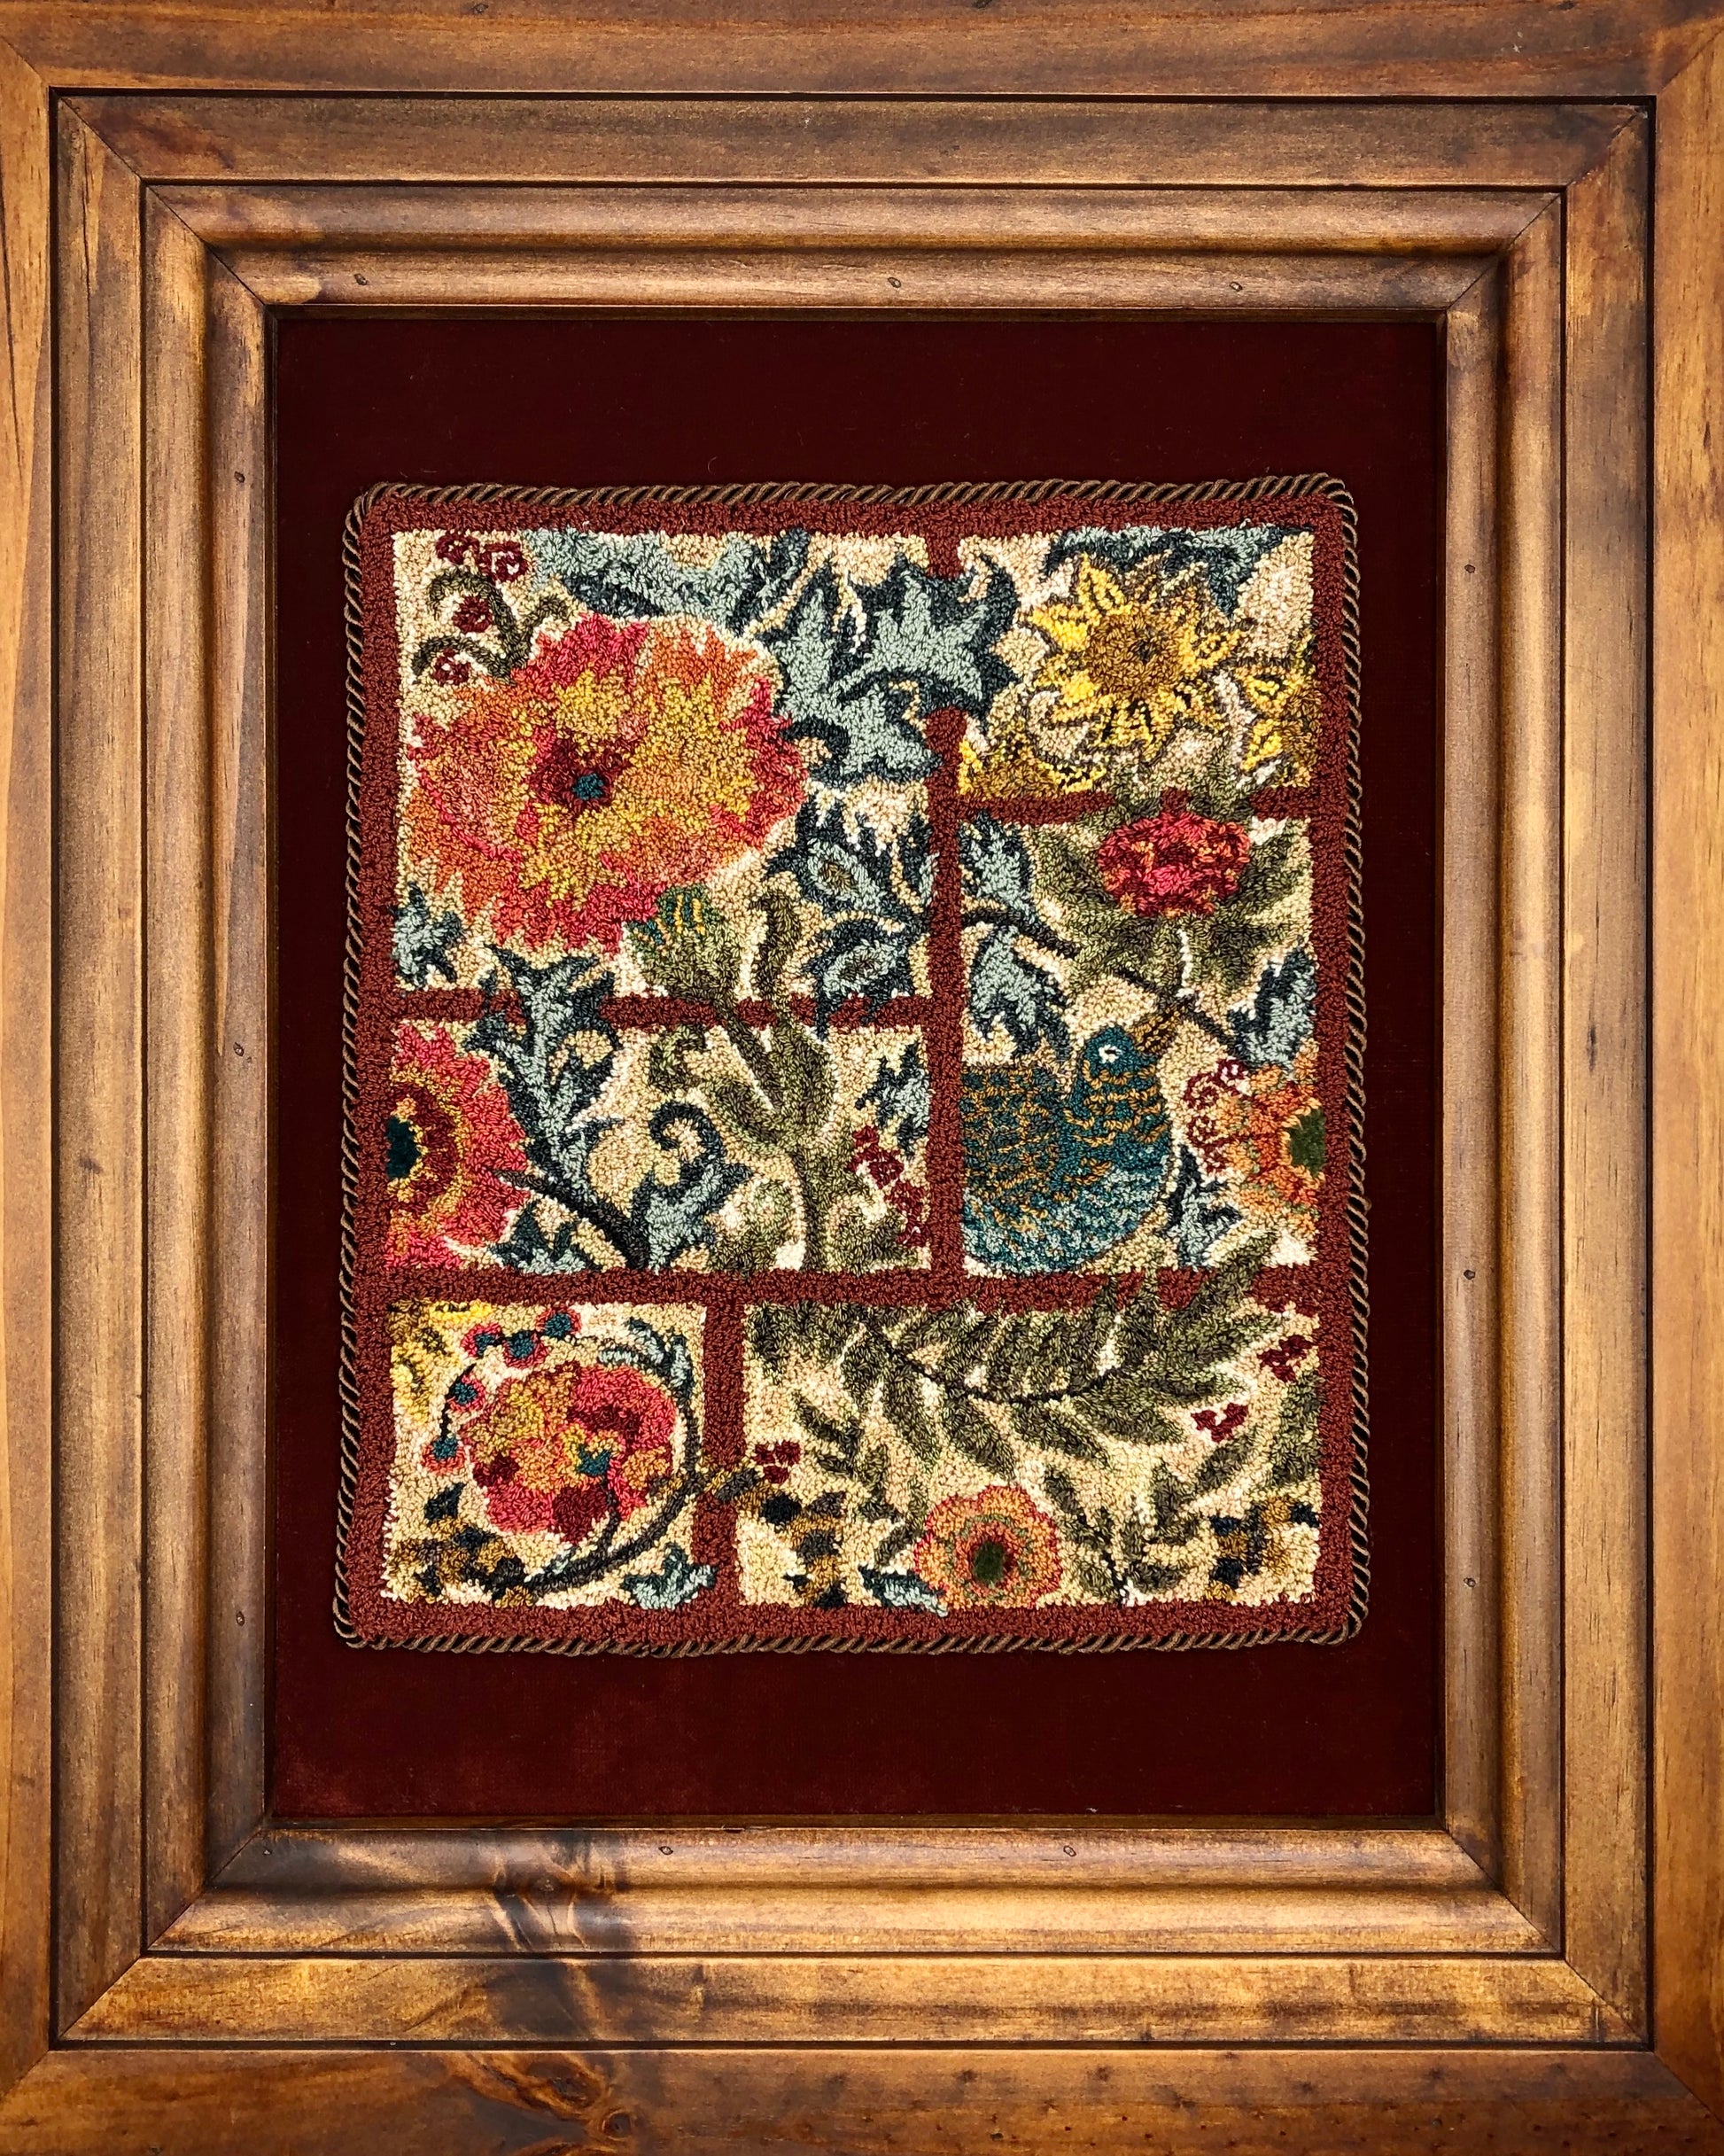  Views of Morris- Punch Needle Patten with Thread Kit by Orphaned Wool. Available as a Paper or Cloth Pattern Copyright Kelly Kanyok 2020